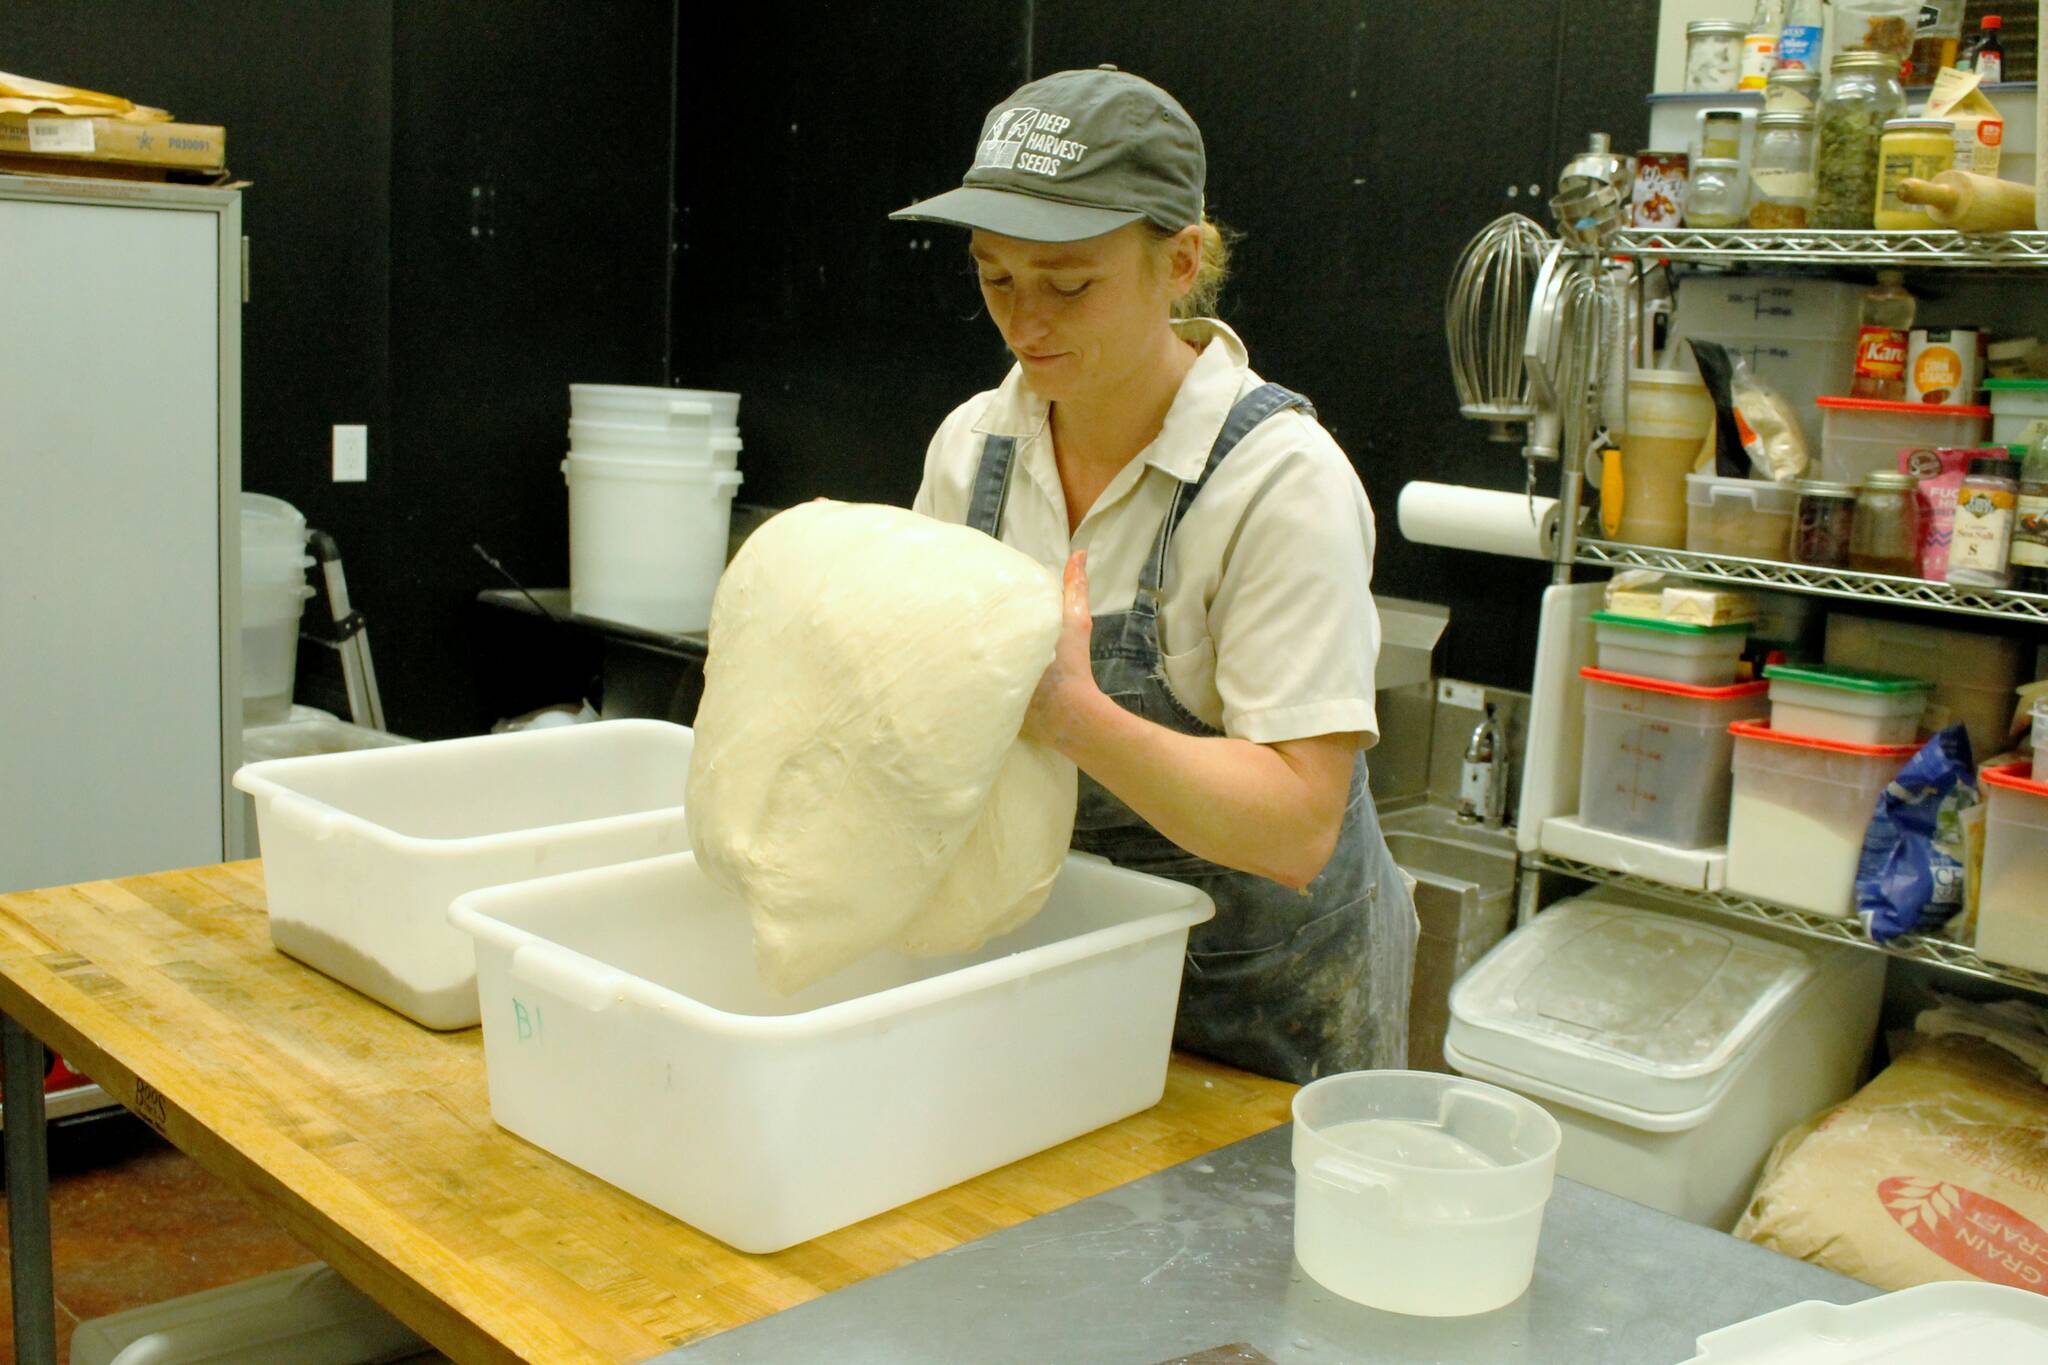 (Photo by Kira Erickson/South Whidbey Record)
Baker Camille Green folds the dough for what will soon be sourdough bread.